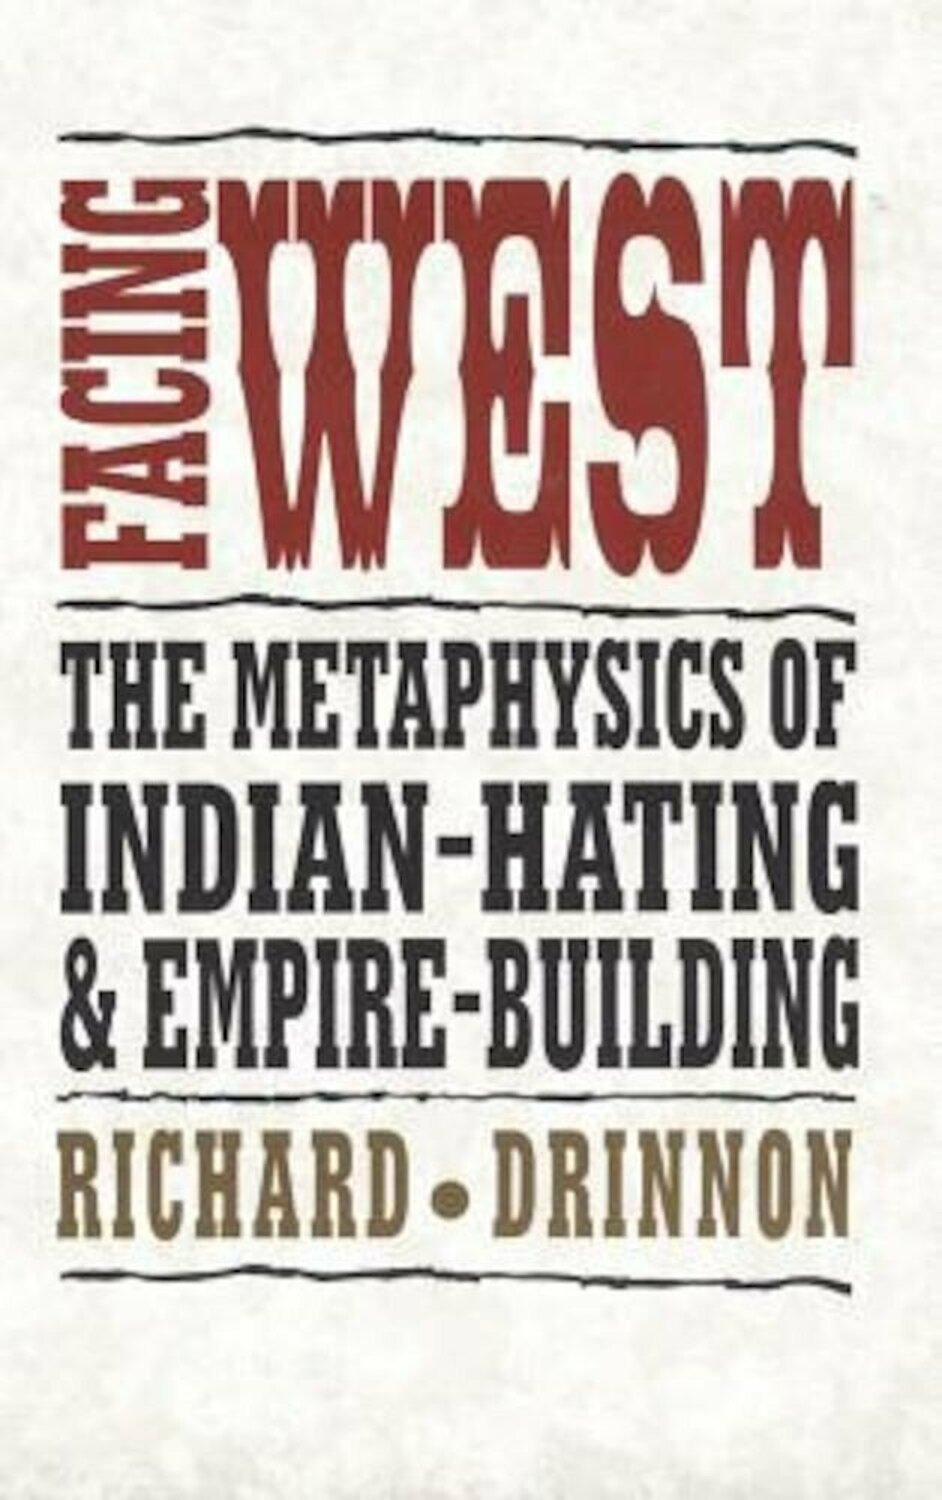 Facing West: The Metaphysics of Indian-Hating & Empire-Building